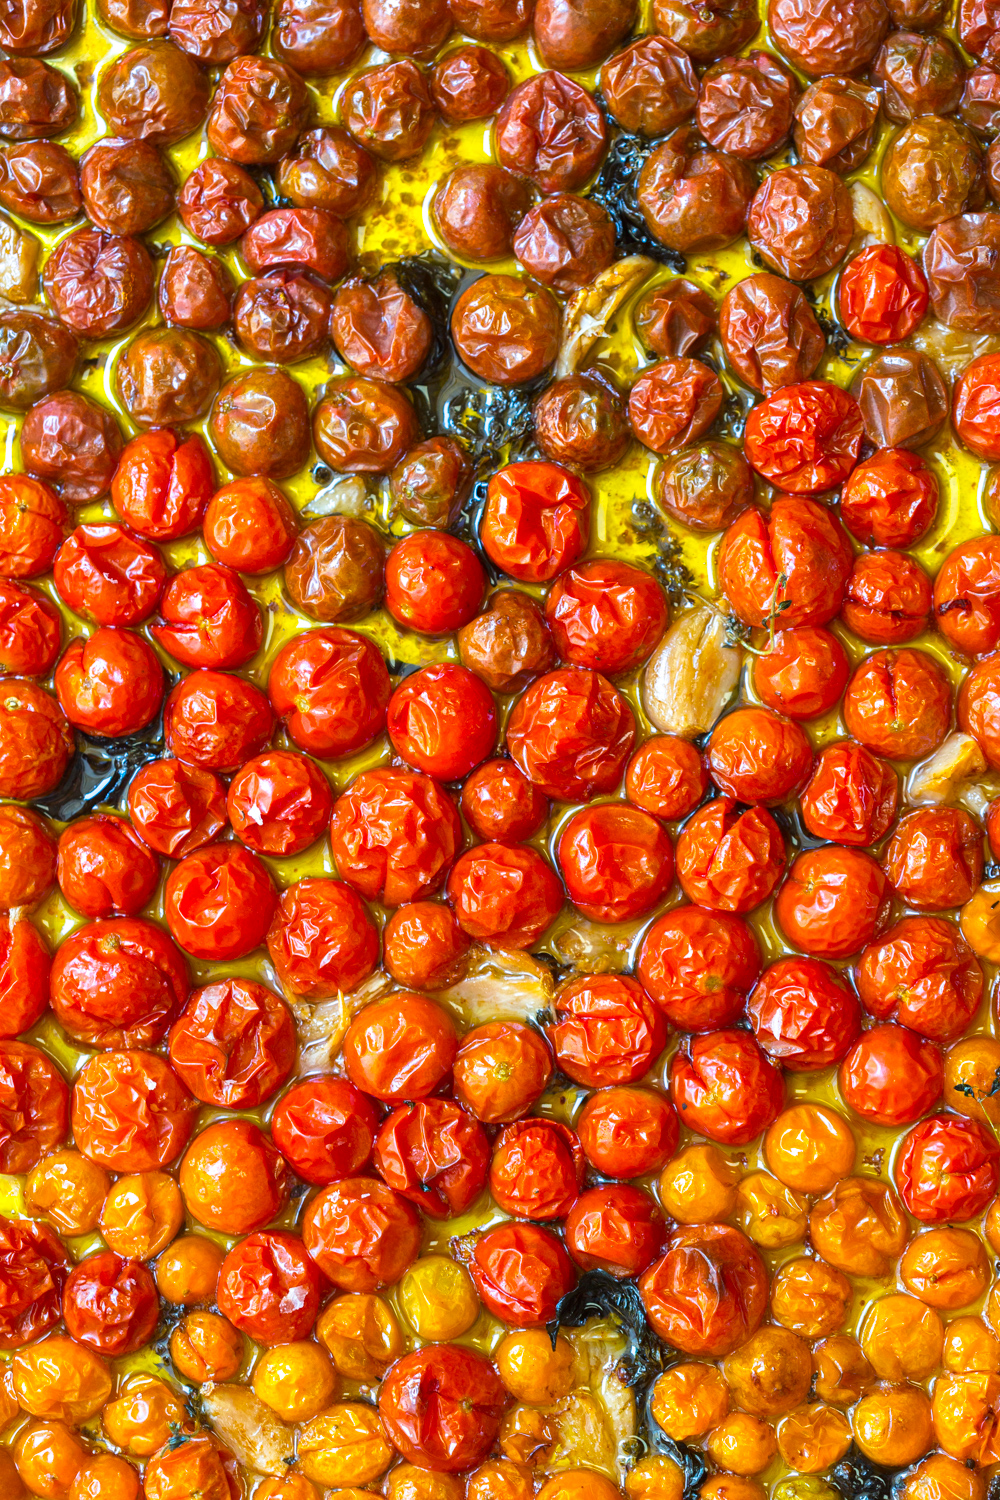 tomatoes and garlic roasted in oil is tomato confit